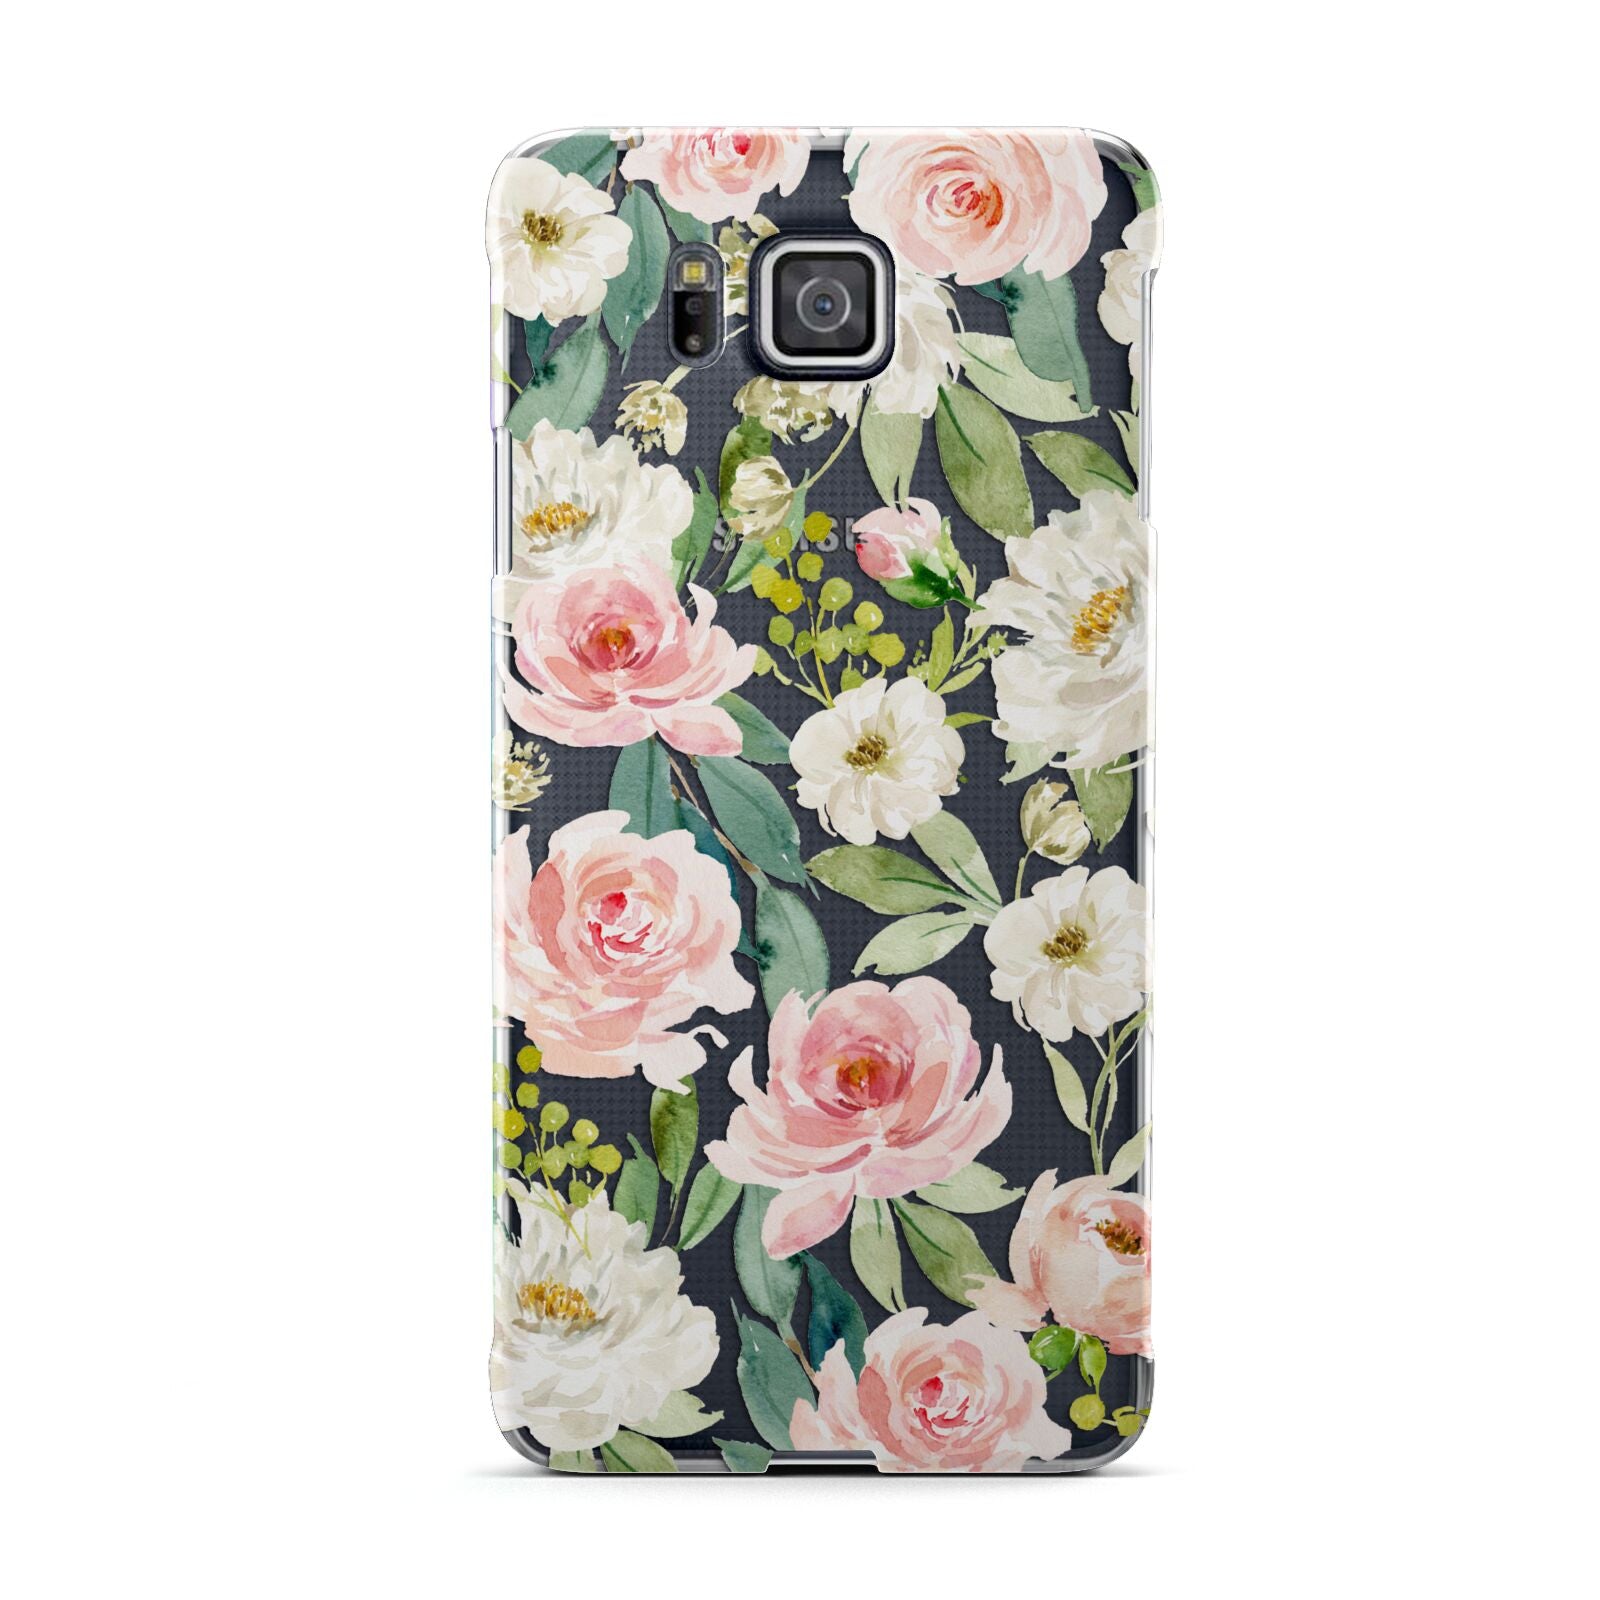 Watercolour Peonies Roses and Foliage Samsung Galaxy Alpha Case